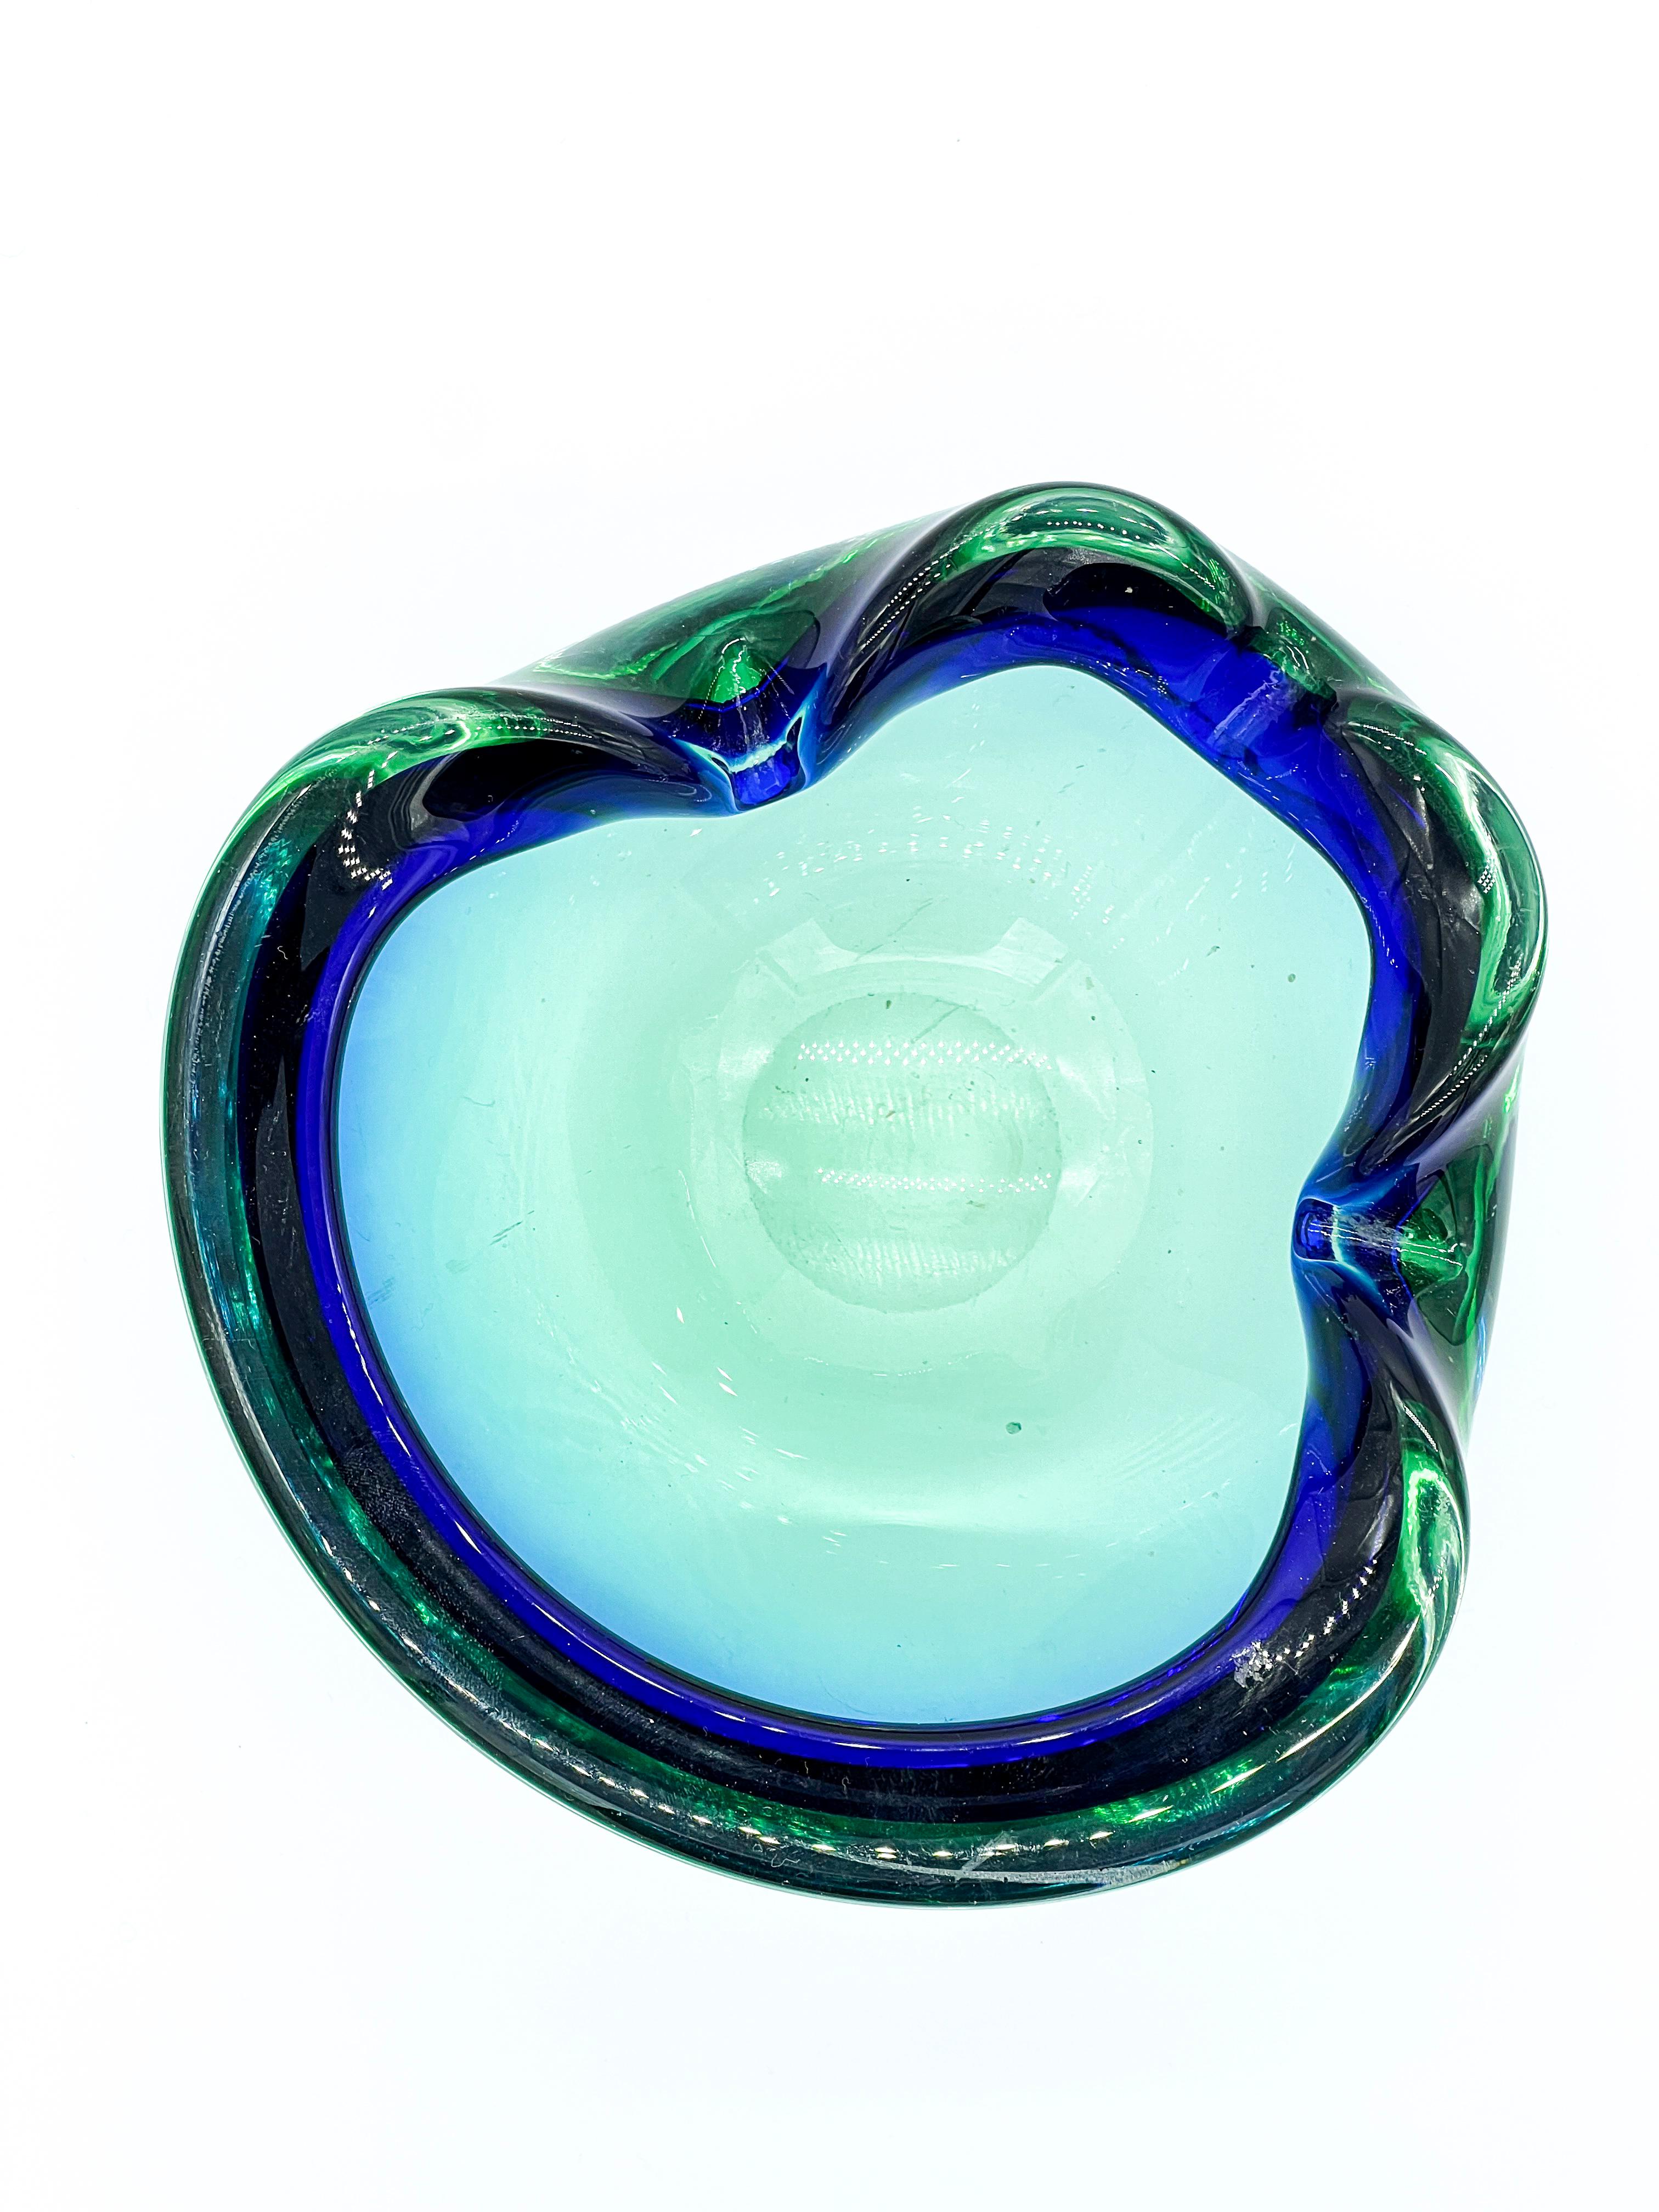 Many are the different types of glass created by master makers on the Venetian island of Murano. From air-thin vases to expressive sculptures, also massive objects with deep and vivid hues of colour represent the great skills of glassmakers.

The